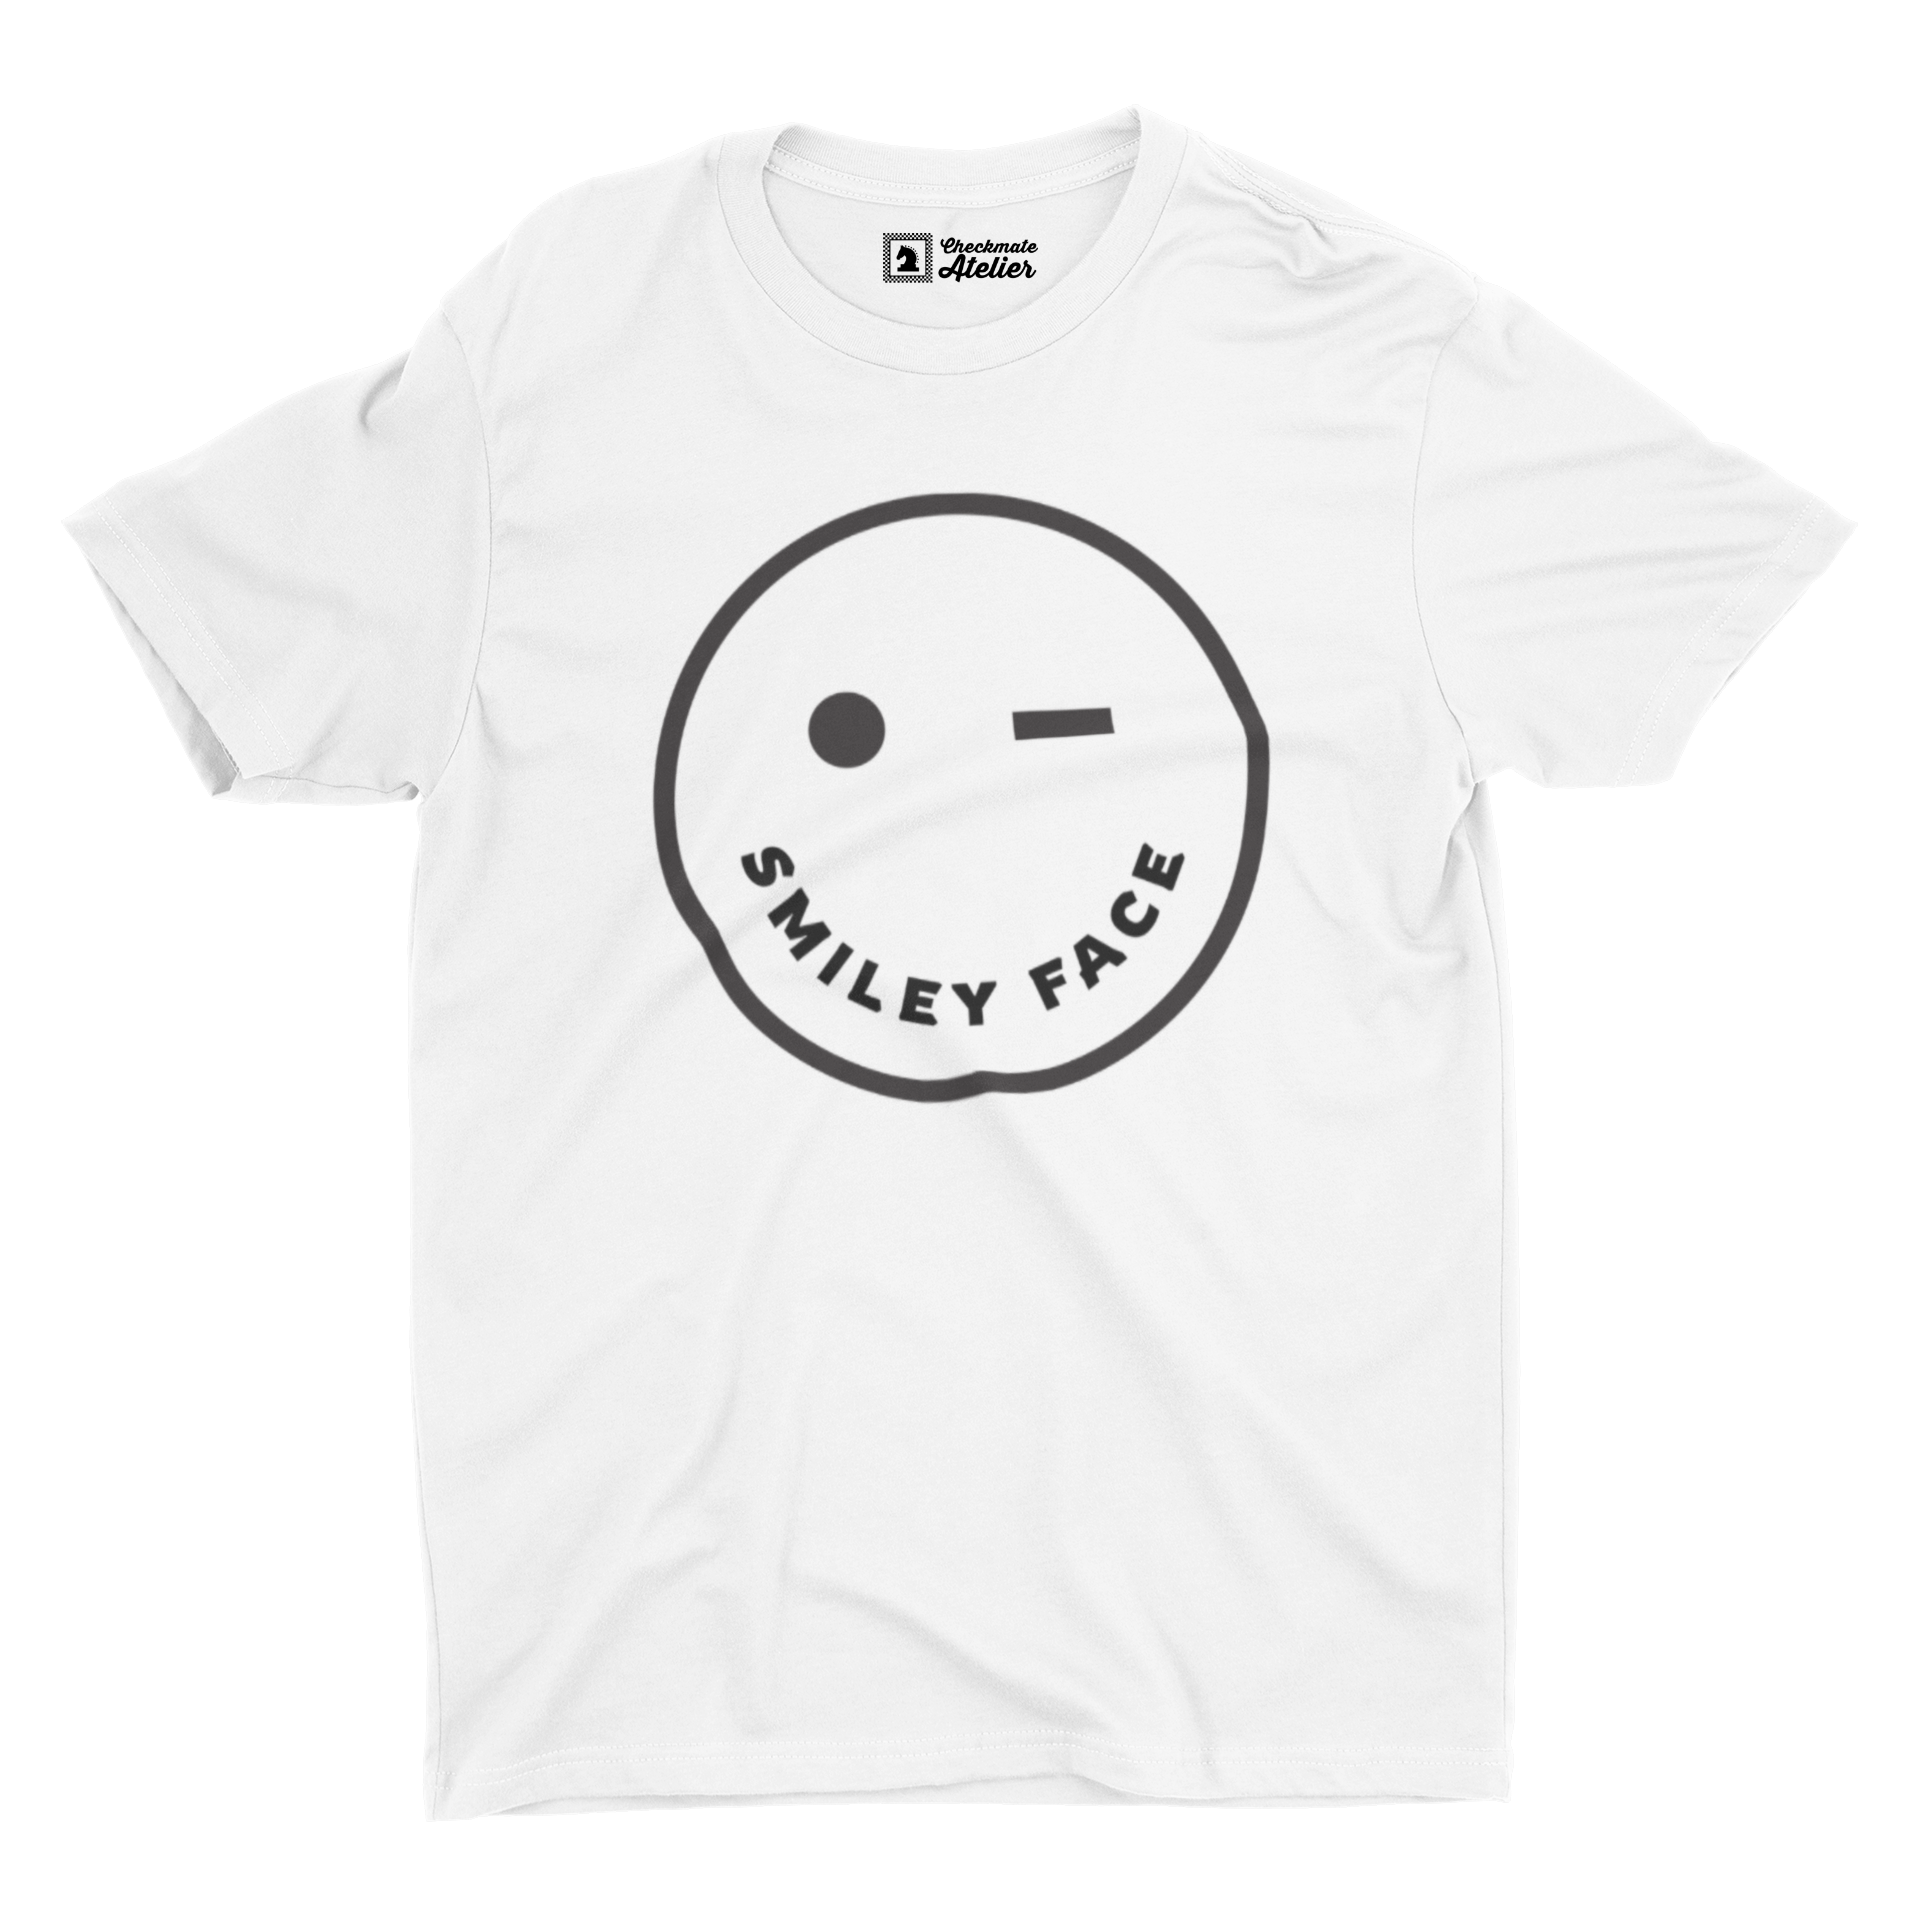 Smiley Face White B&W T-Shirt - Checkmate Atelier - Official Online Store